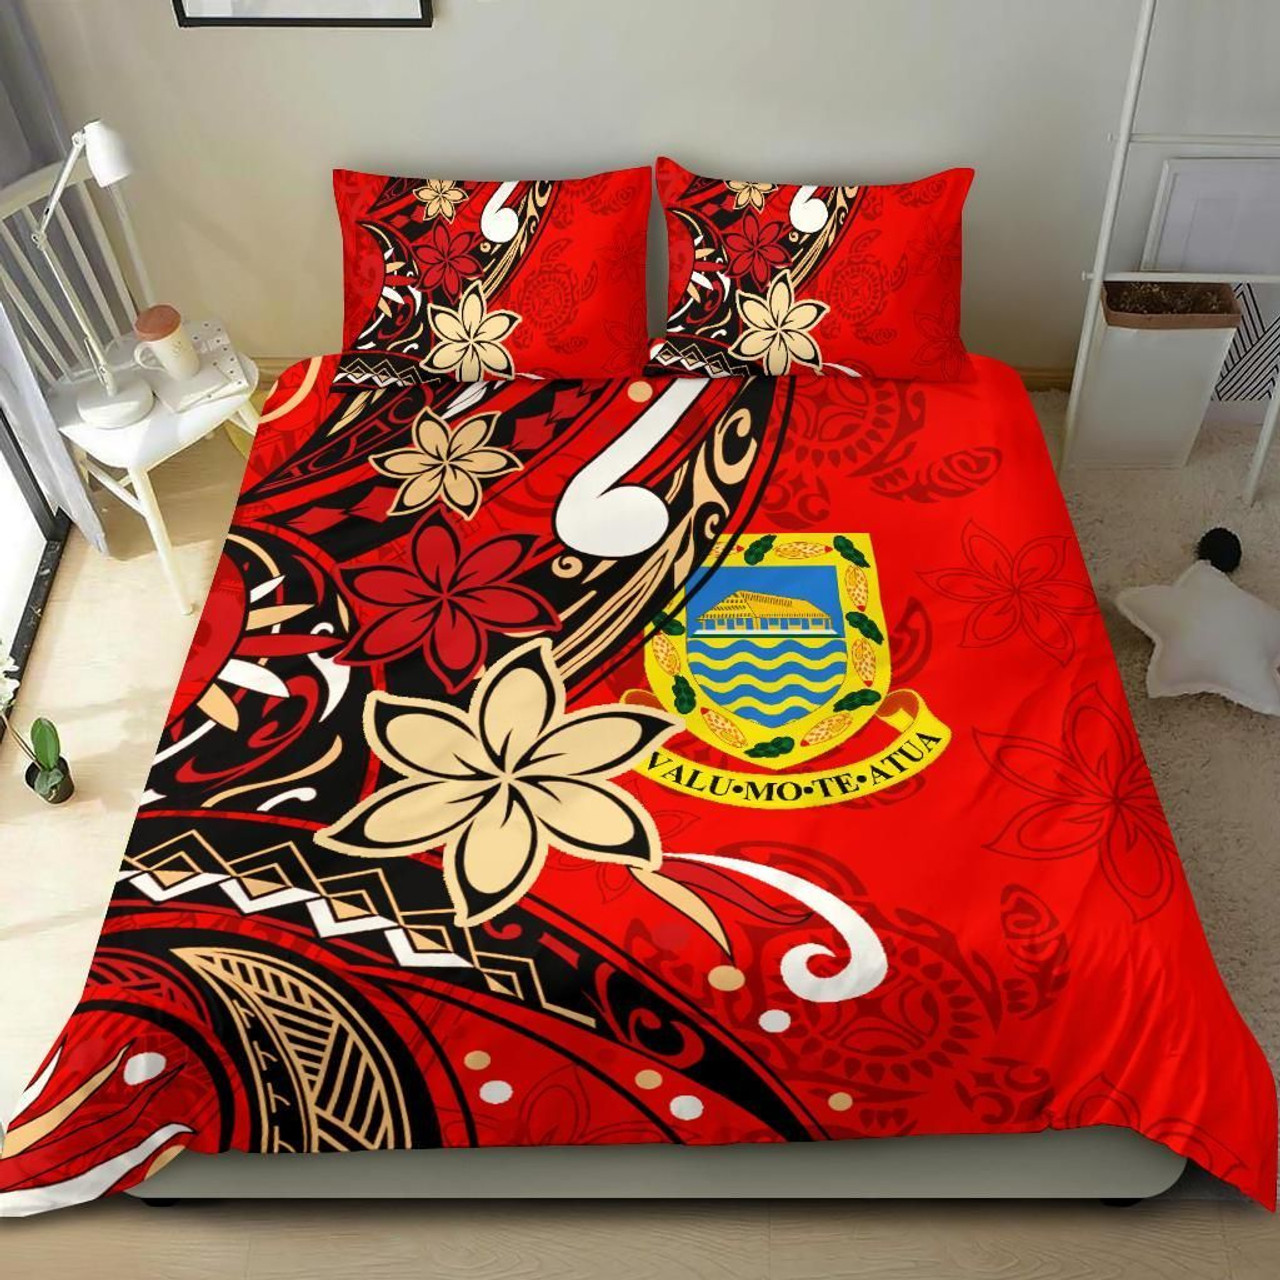 Tuvalu Polynesian Bedding Set - Tribal Flower With Special Turtles Red Color 1